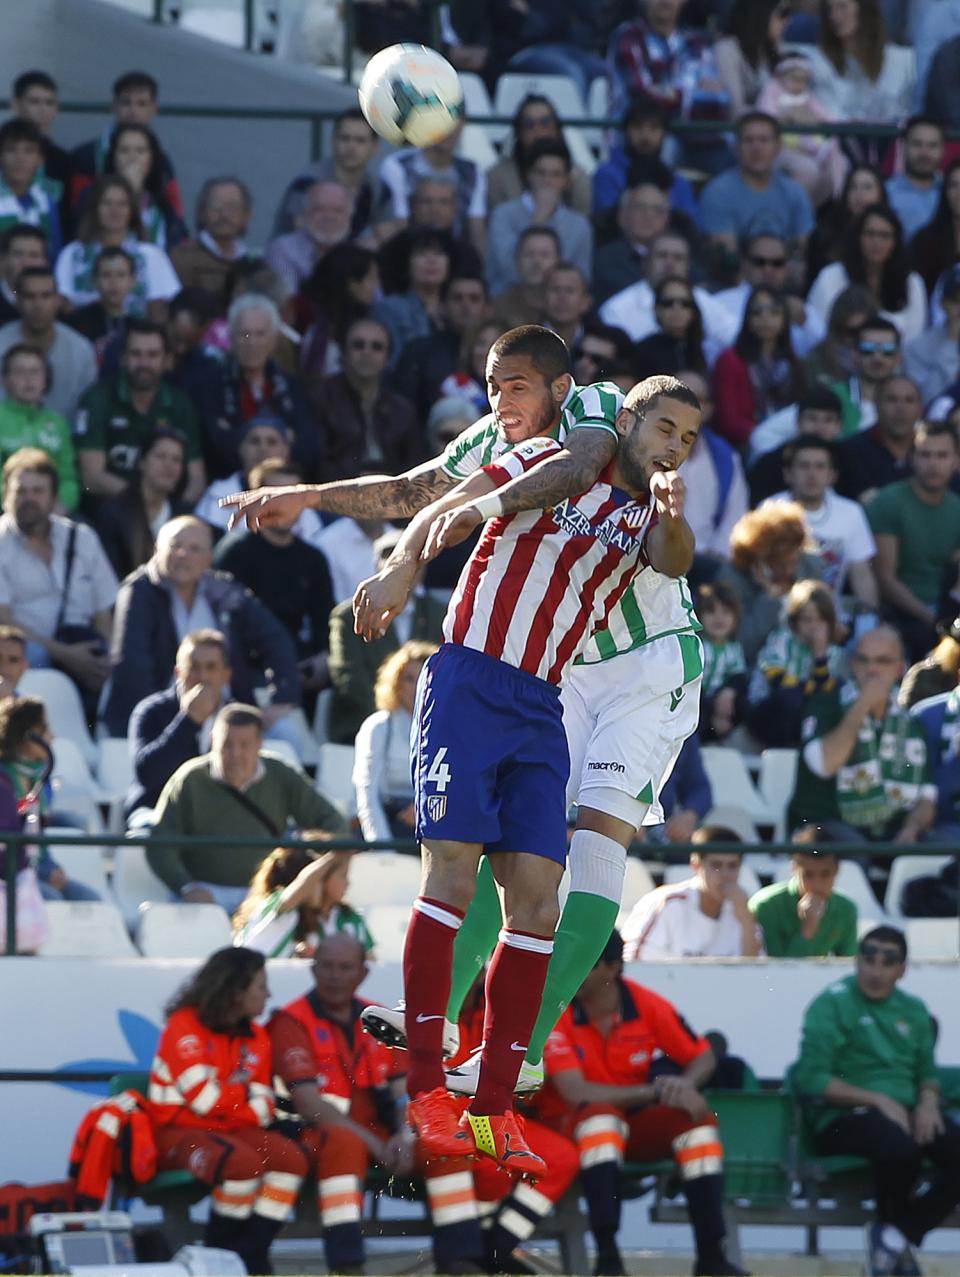 Atletico de Madrid's Mario Suarez, front, and Betis' Braian Rodriguez, behind, fight for the ball during their La Liga soccer match at the Benito Villamarin stadium, in Seville, Spain on Sunday, March 23, 2014. (AP Photo/Angel Fernandez)